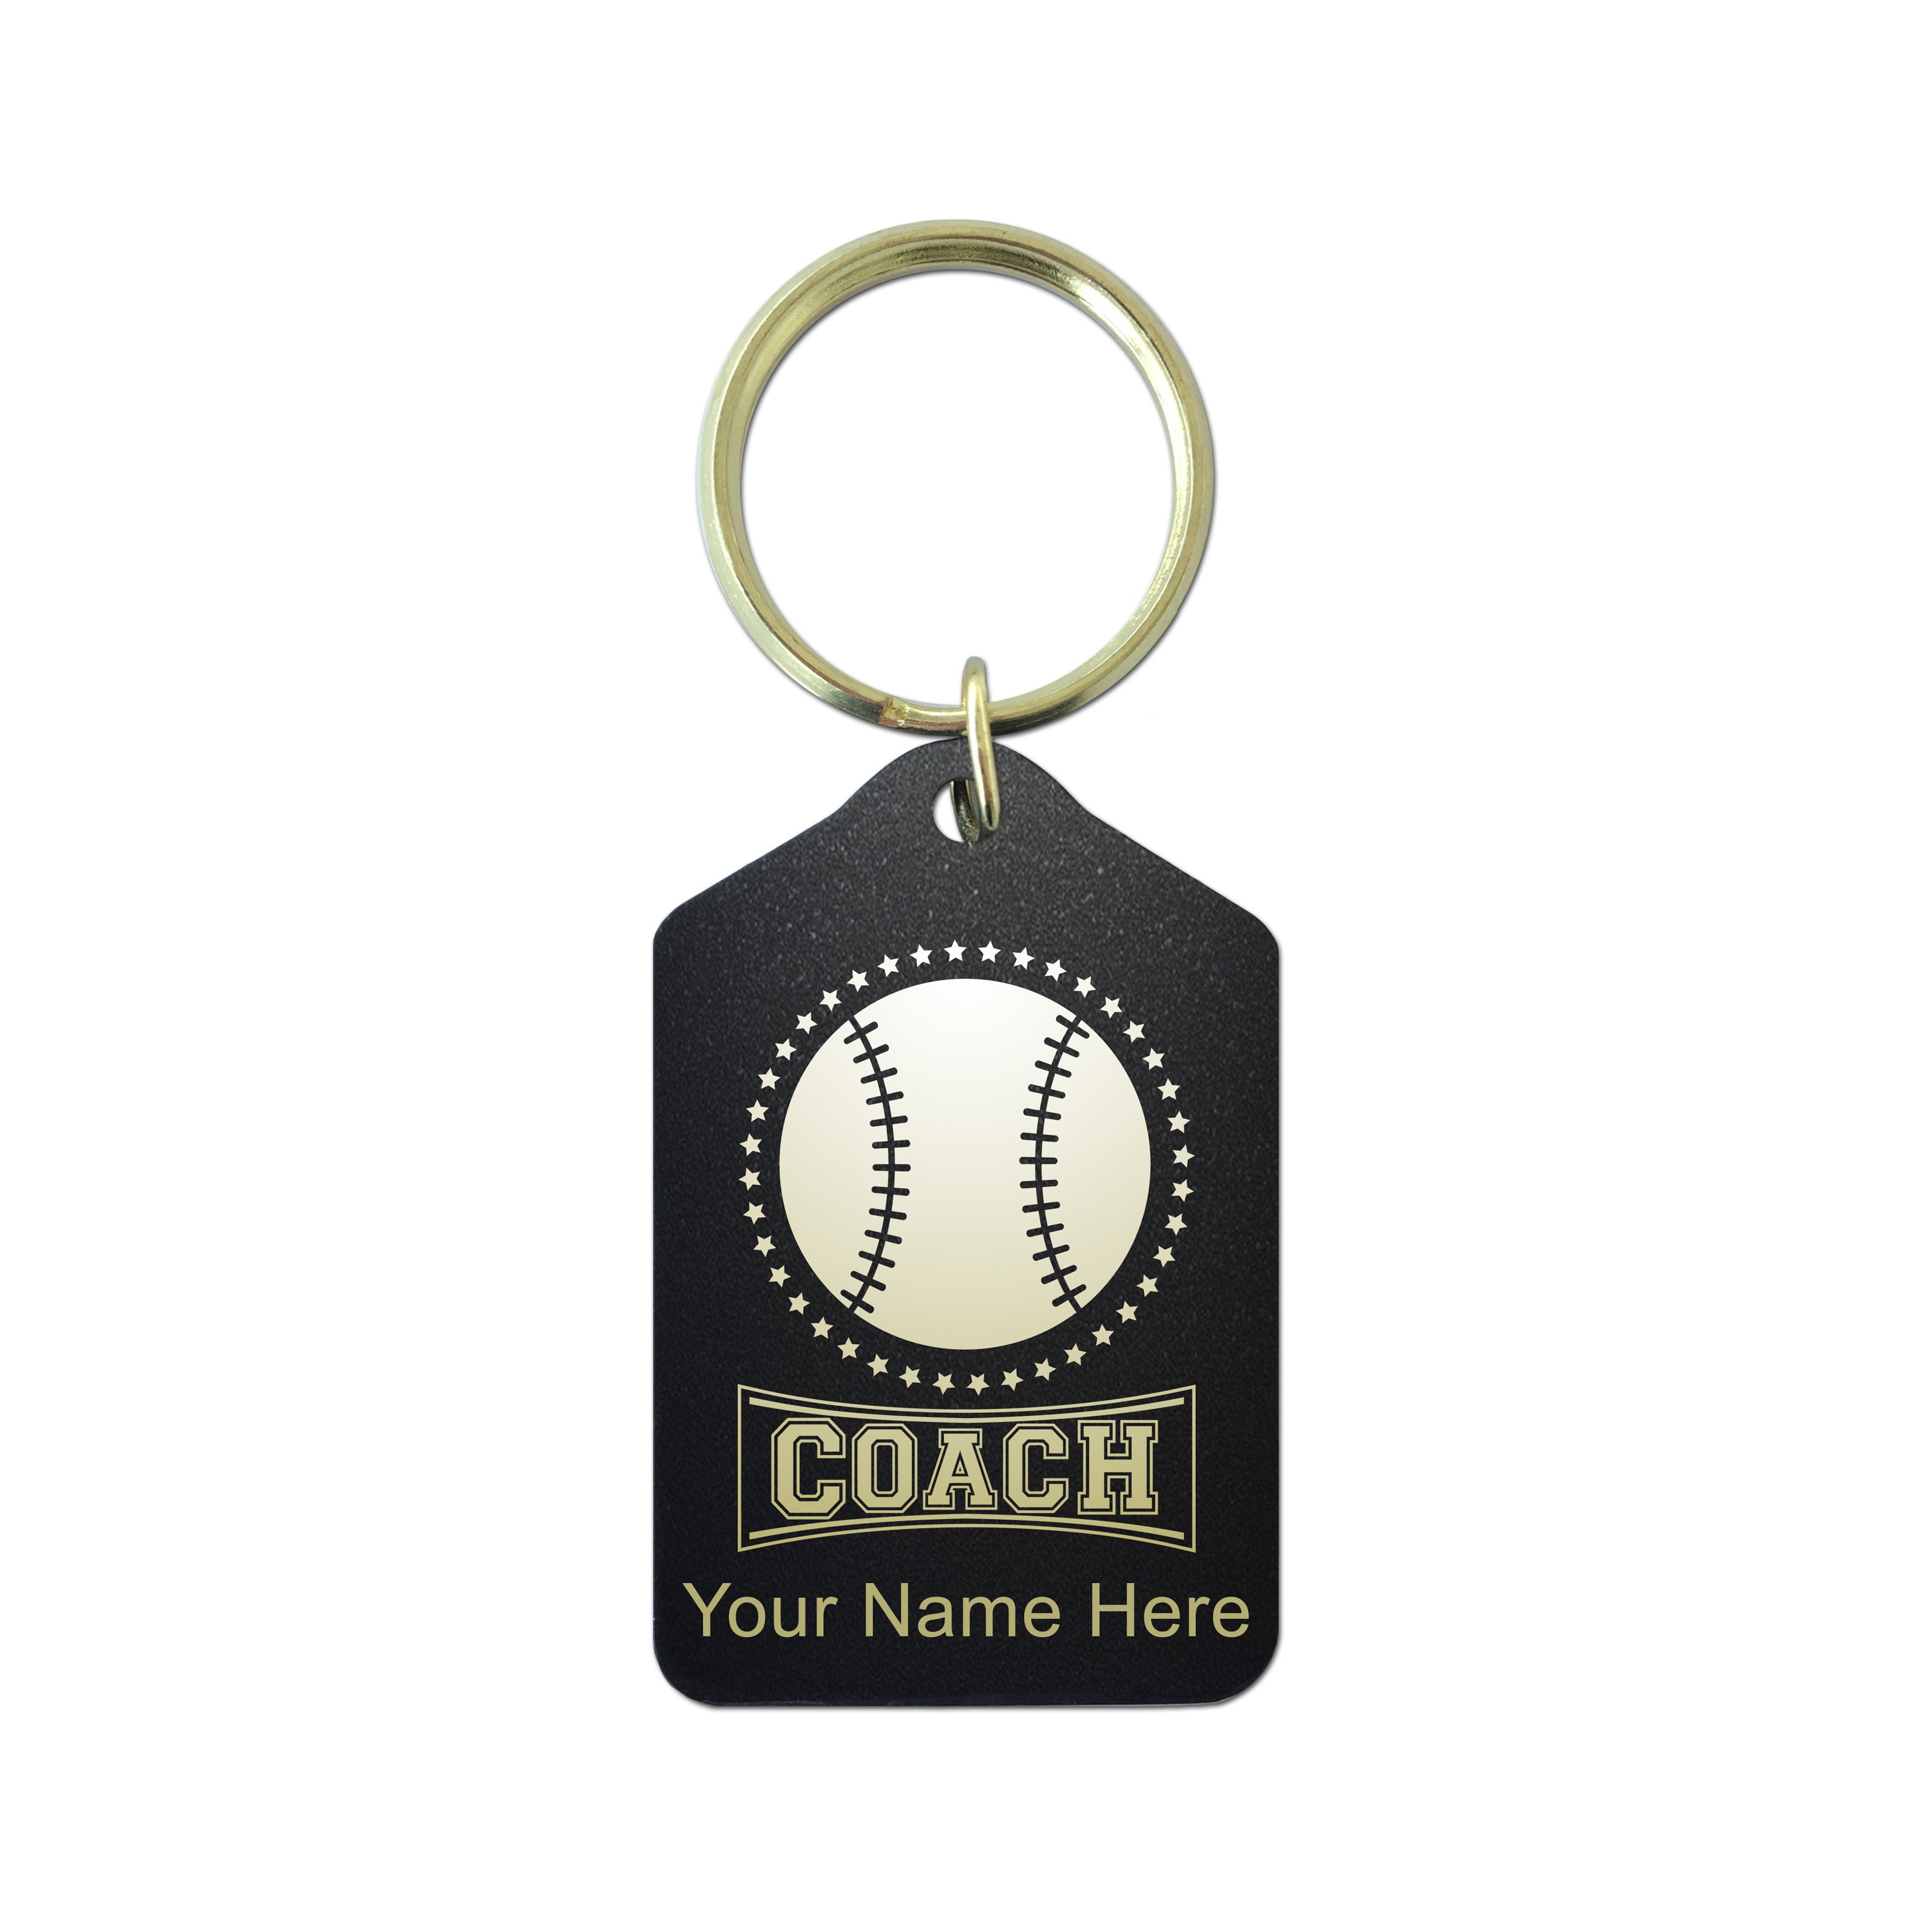 LaserGram Custom Engraved Gifts Faux Leather Oval Keychain, Baseball Ball, Personalized Engraving Included